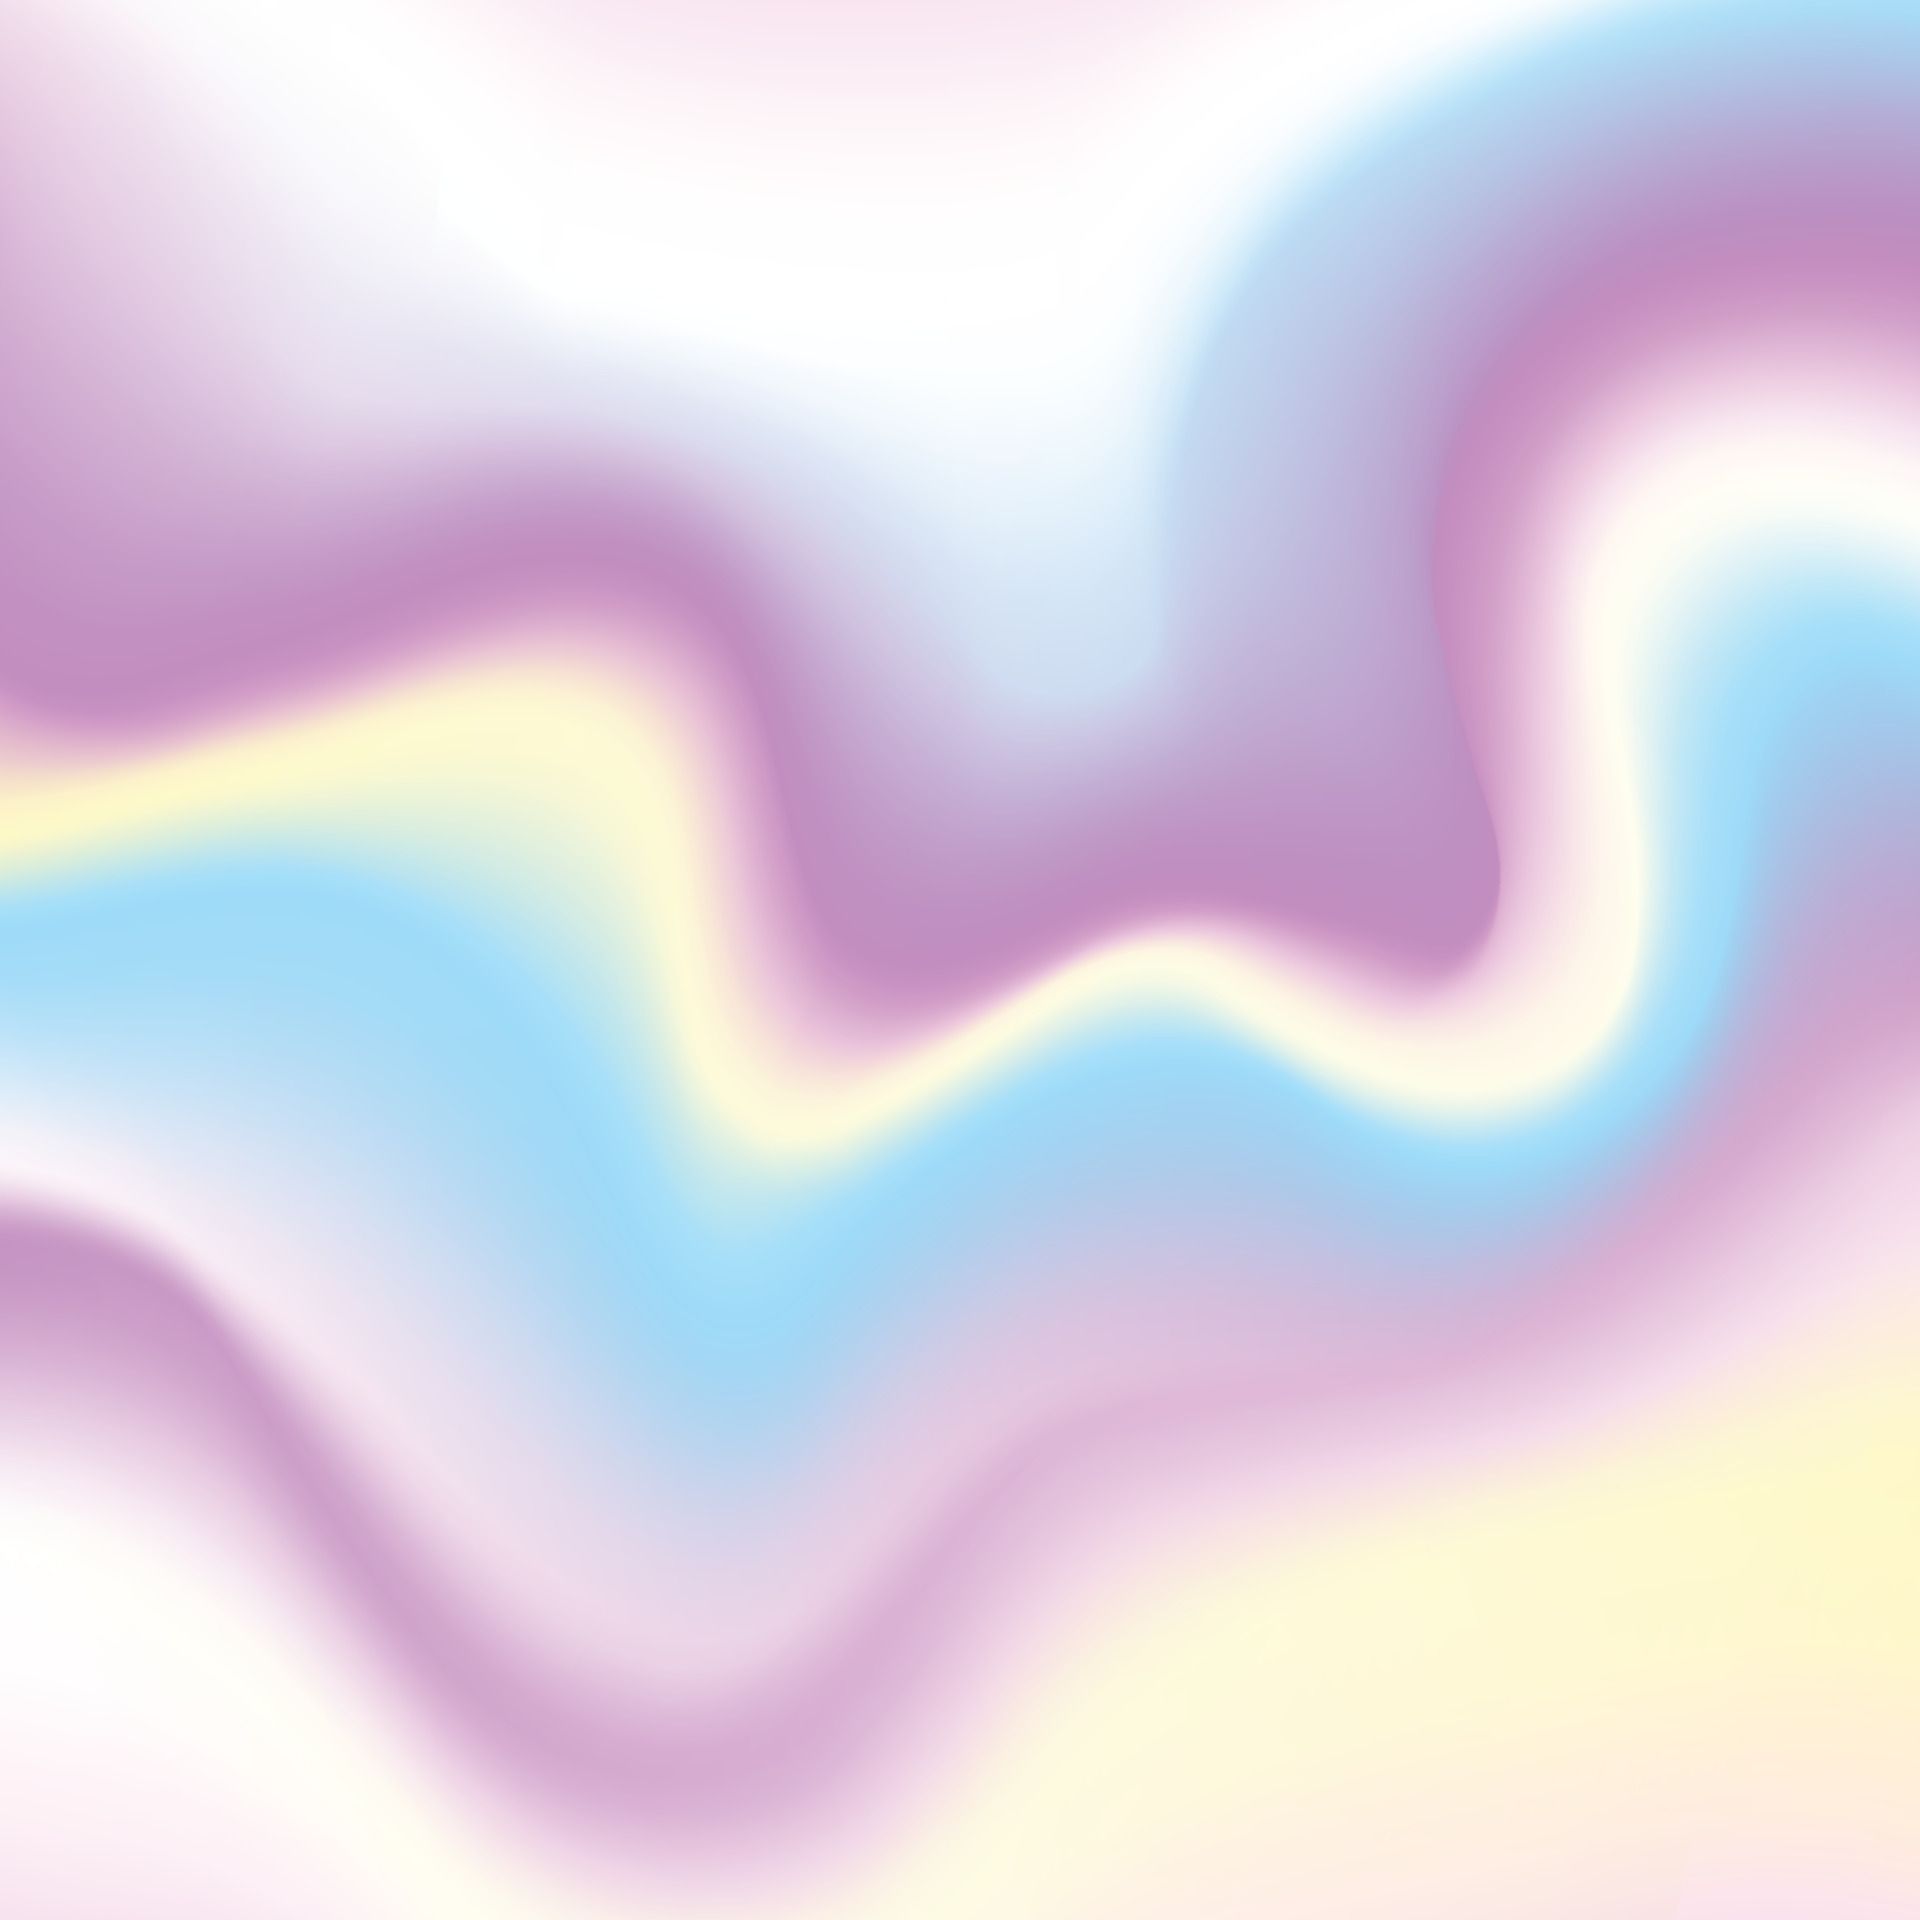 A soft pastel gradient background with wavy lines - Holographic, iridescent